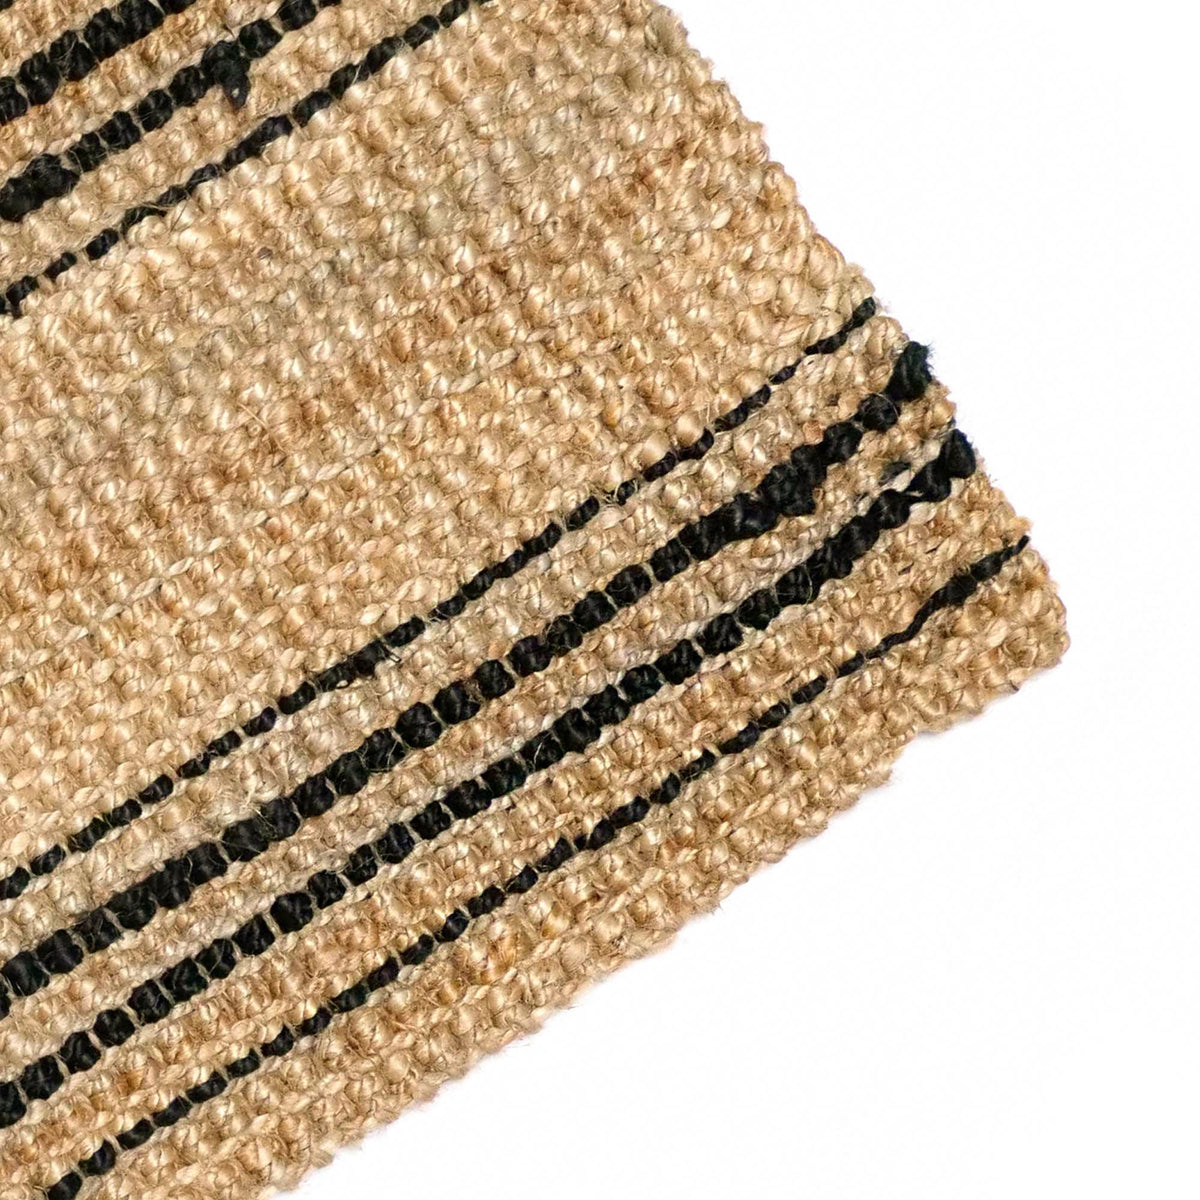 OnlyMat Lines of Life - Artisan Luxe Rug - Handwoven Jute Carpet - Organic Natural Sustainable